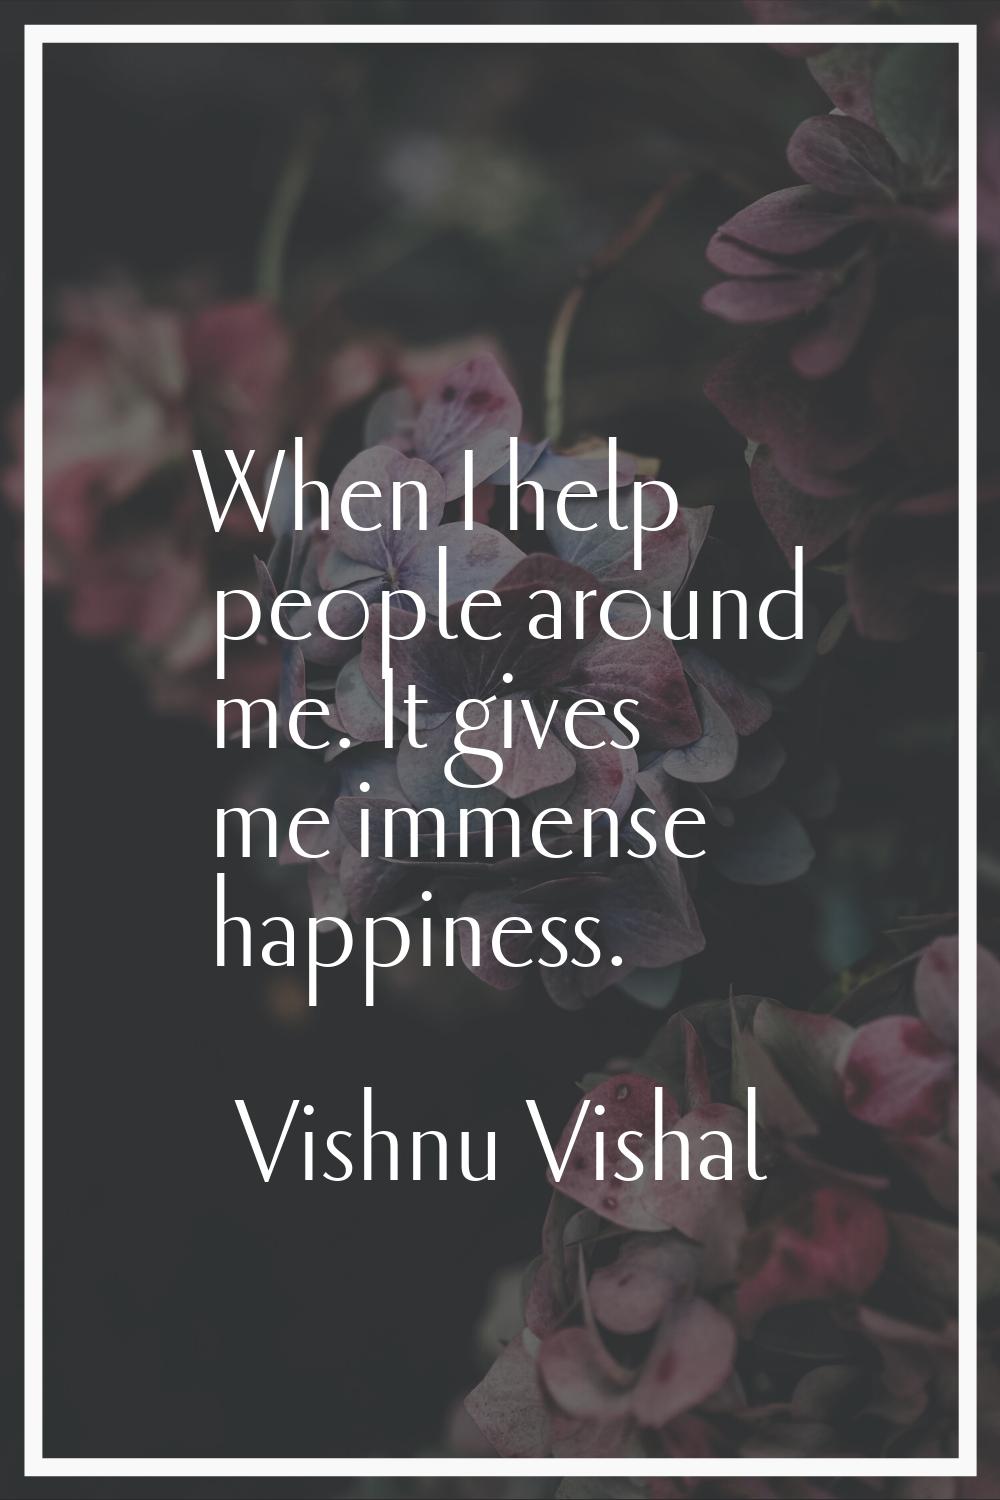 When I help people around me. It gives me immense happiness.